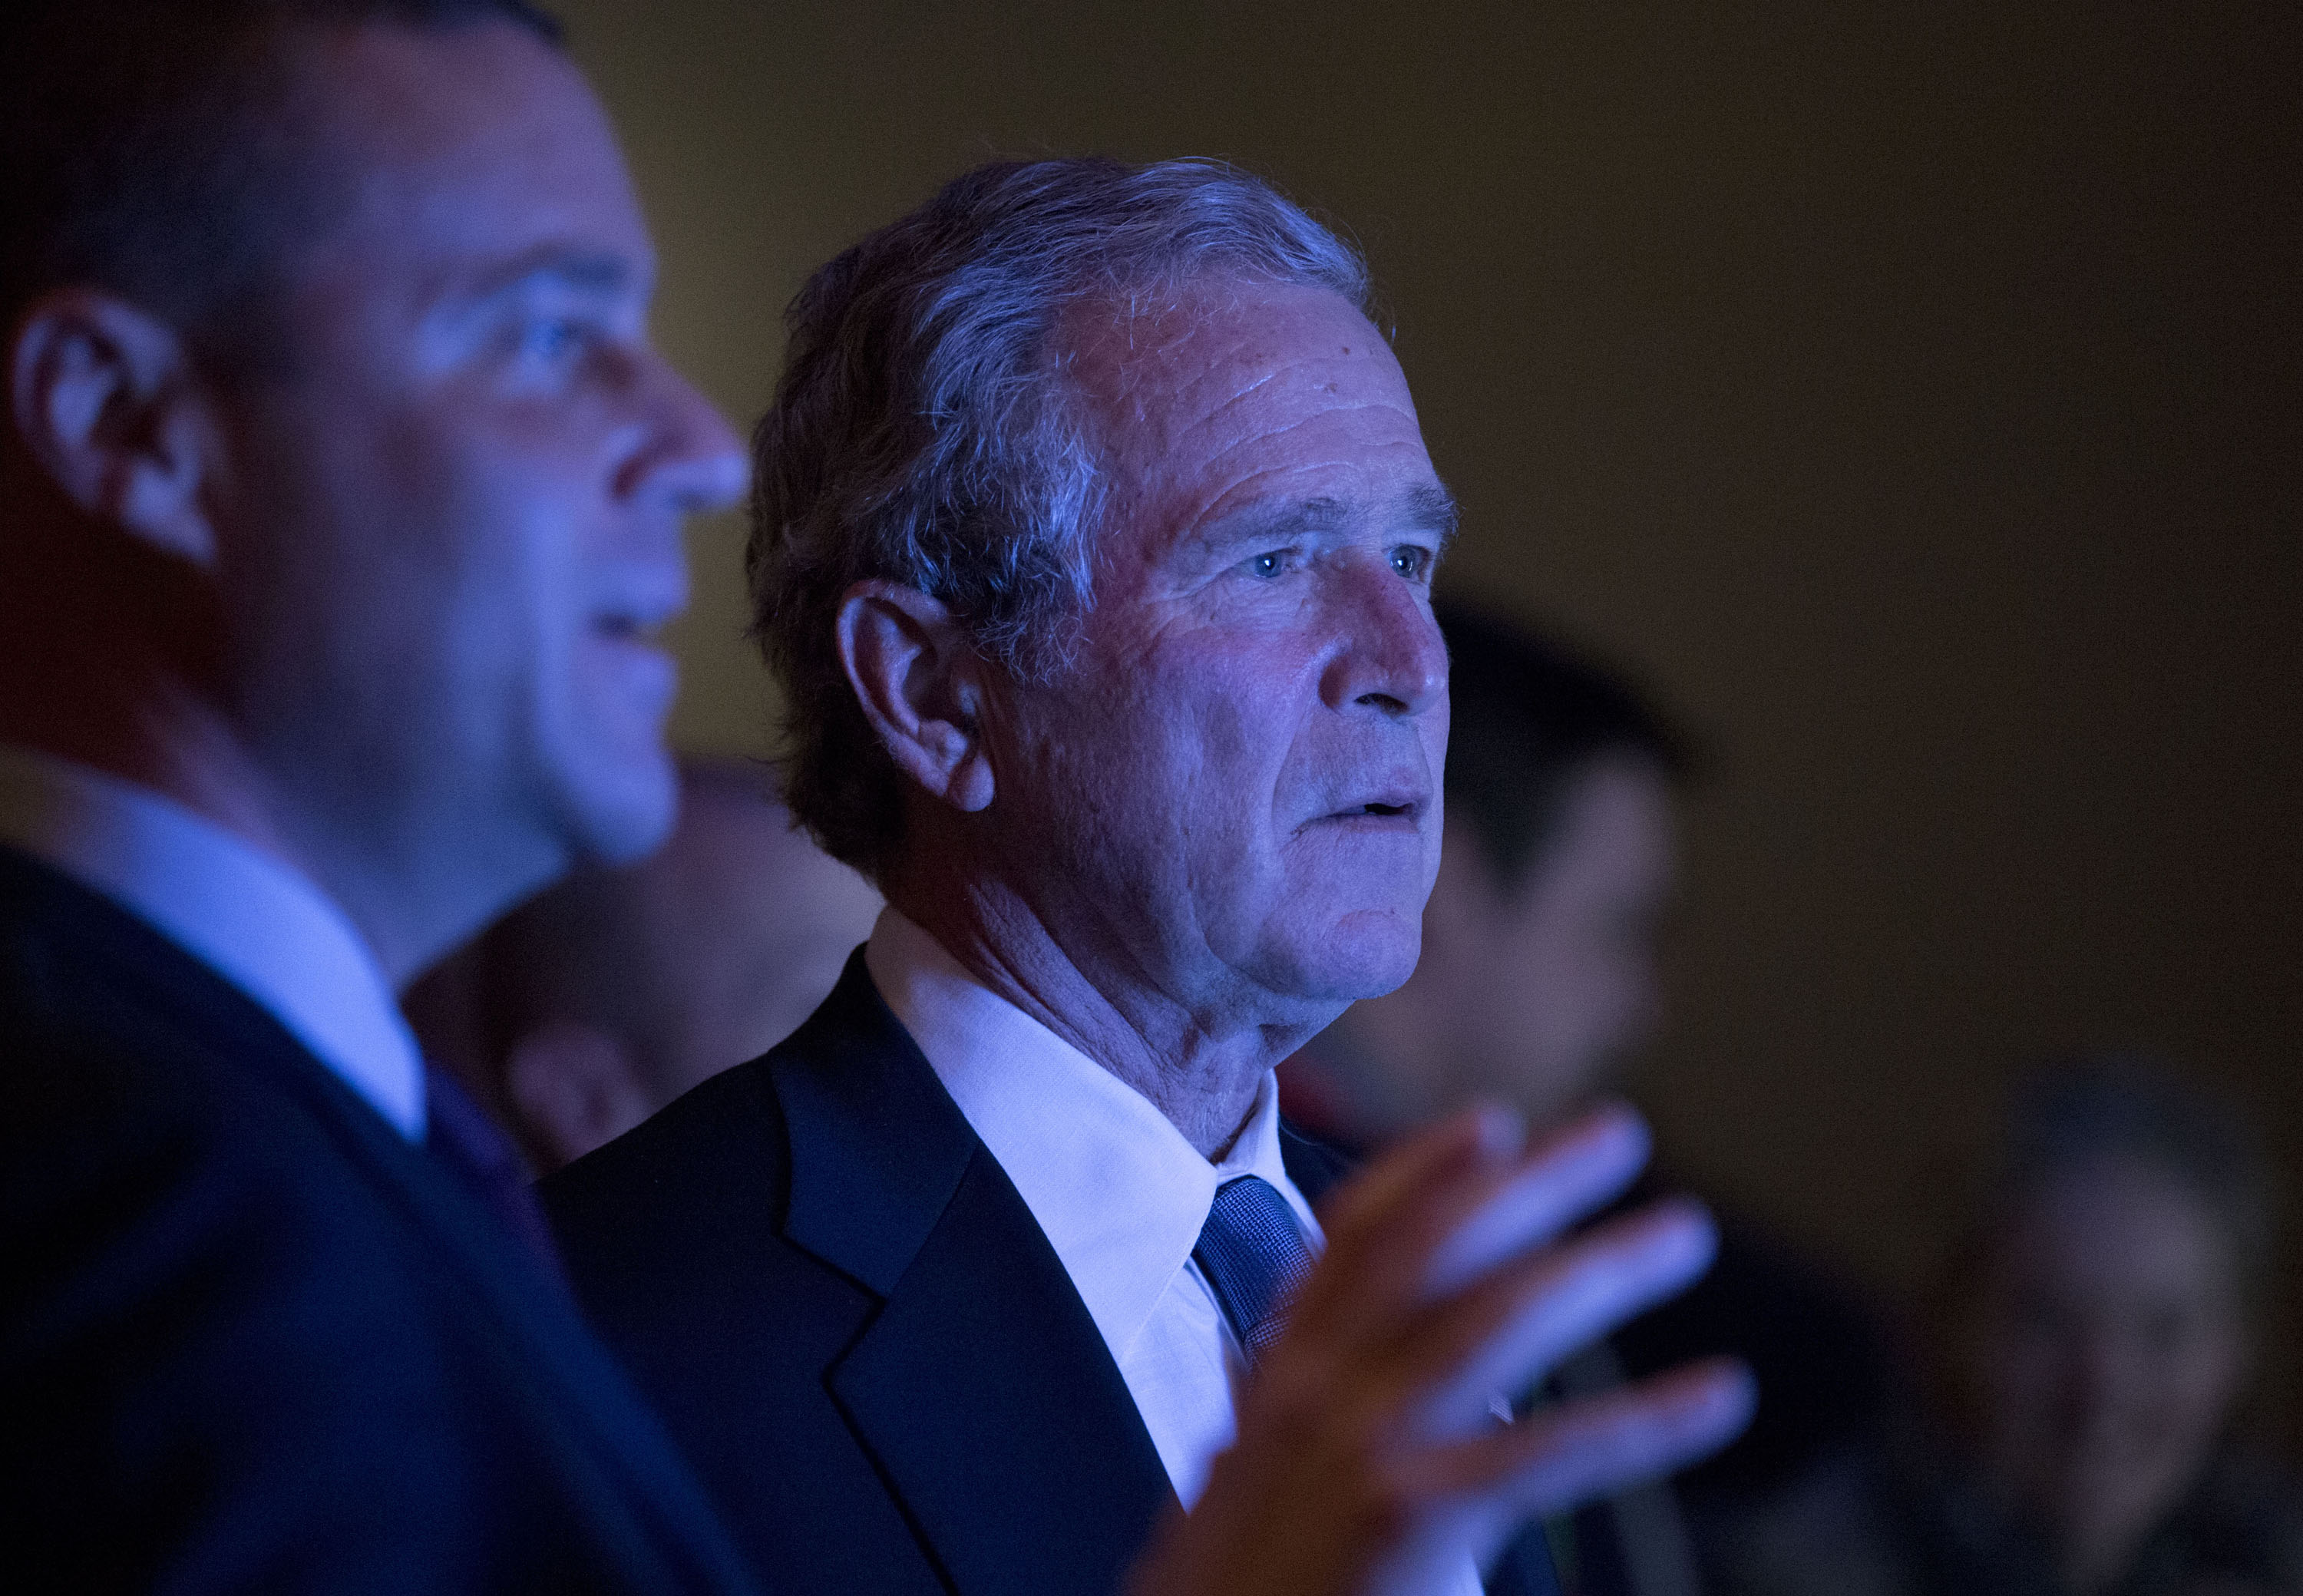 Former President George W. Bush looks at an object out of view as he visits the 9/11 Memorial Museum.